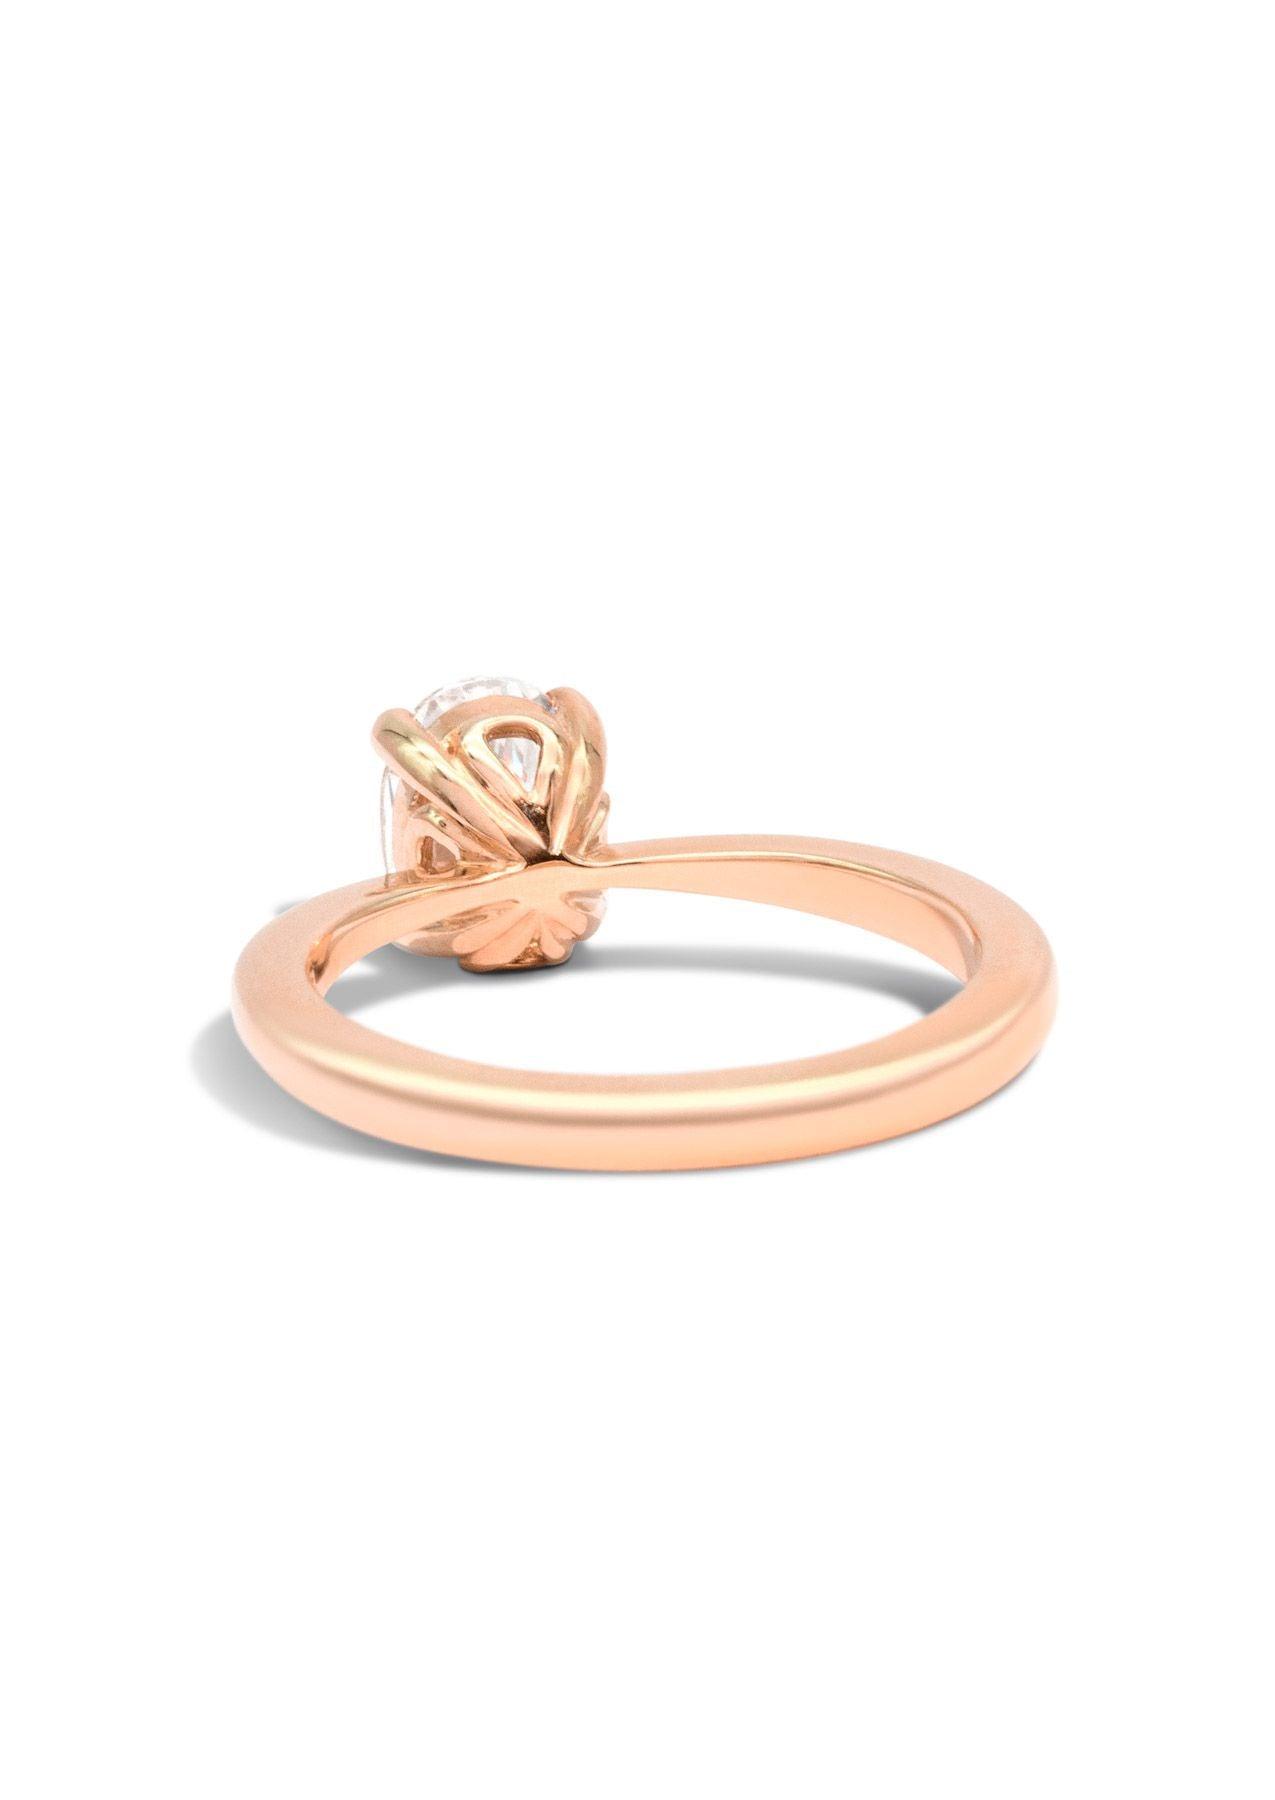 The June Rose Gold Cultured Diamond Ring - Molten Store